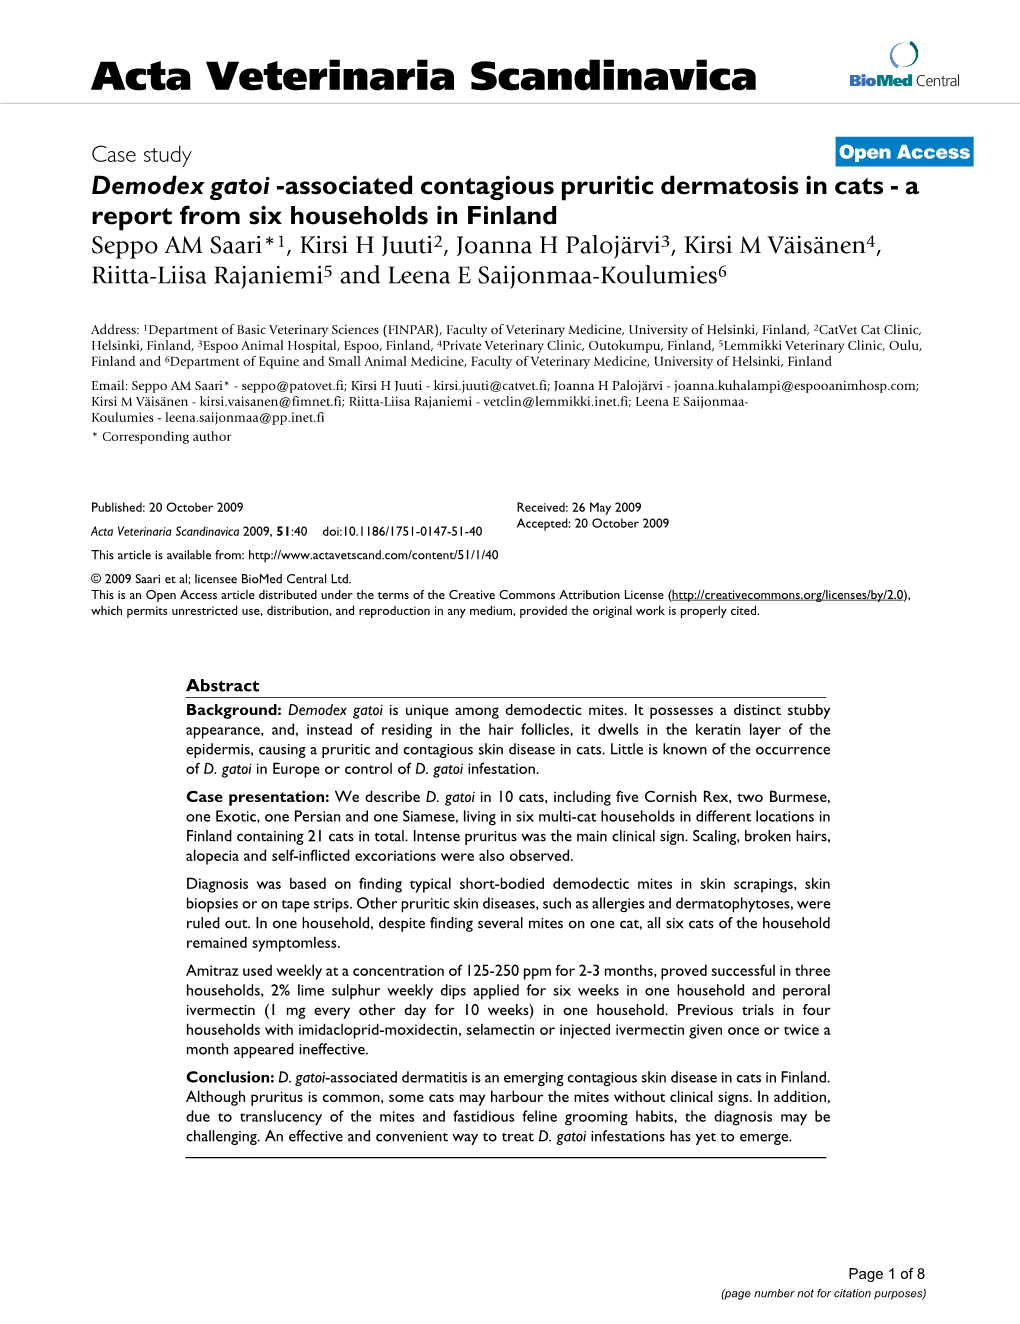 Demodex Gatoi-Associated Contagious Pruritic Dermatosis in Cats-A Report from Six Households in Finland